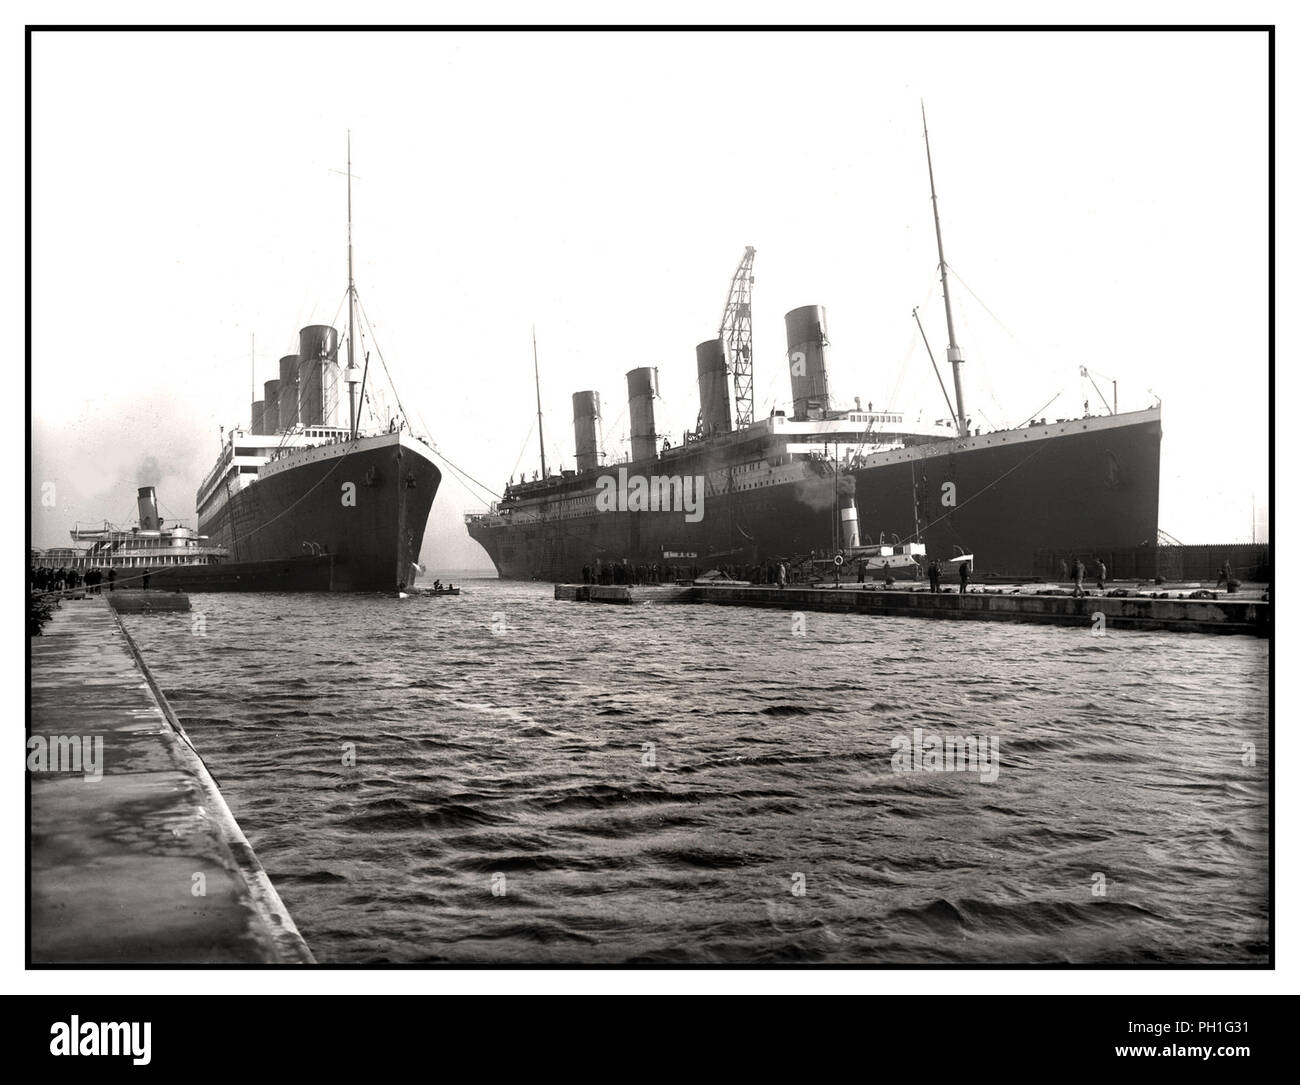 TITANIC & OLYMPIC sister ocean liners Vintage B&W RMS Olympic entering  Belfast docking harbour alongside with RMS Titanic undergoing final  preparations March 1912, for her fateful maiden voyage on 14th April 1912